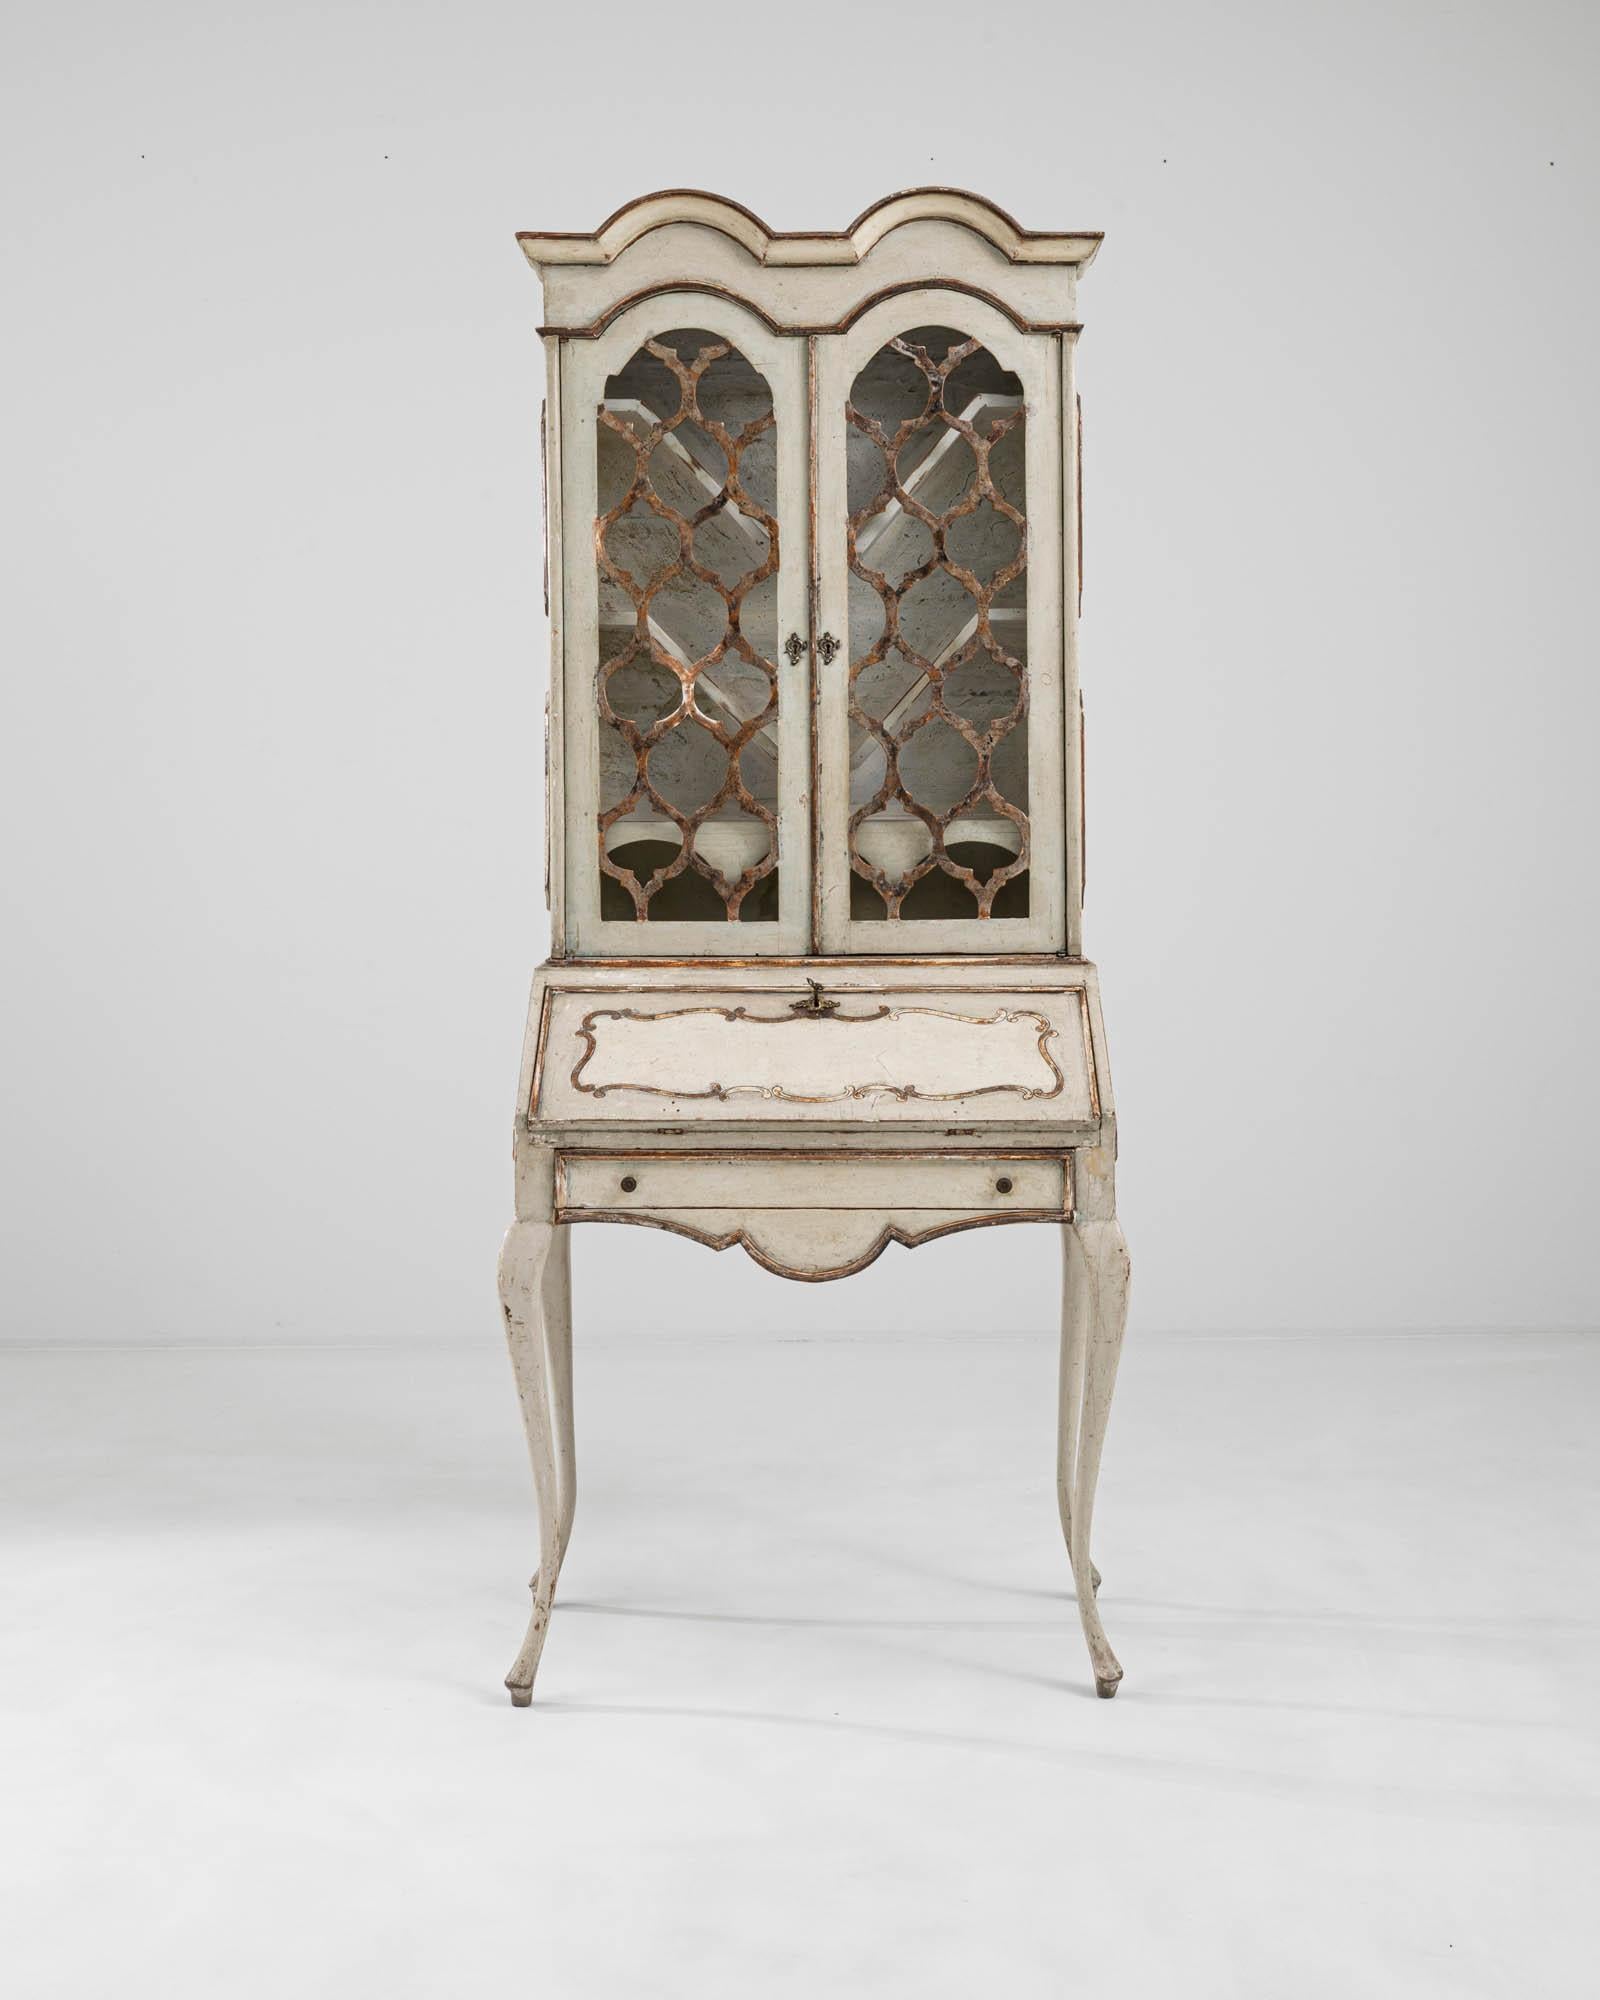 A wooden vitrine created in 20th century Italy. A true treasure, this exquisitely shaped vitrine is characterized by mesmerizing patterning, elegantly shaped legs and a subtle yet striking color palette. Curiously shaped display shelves